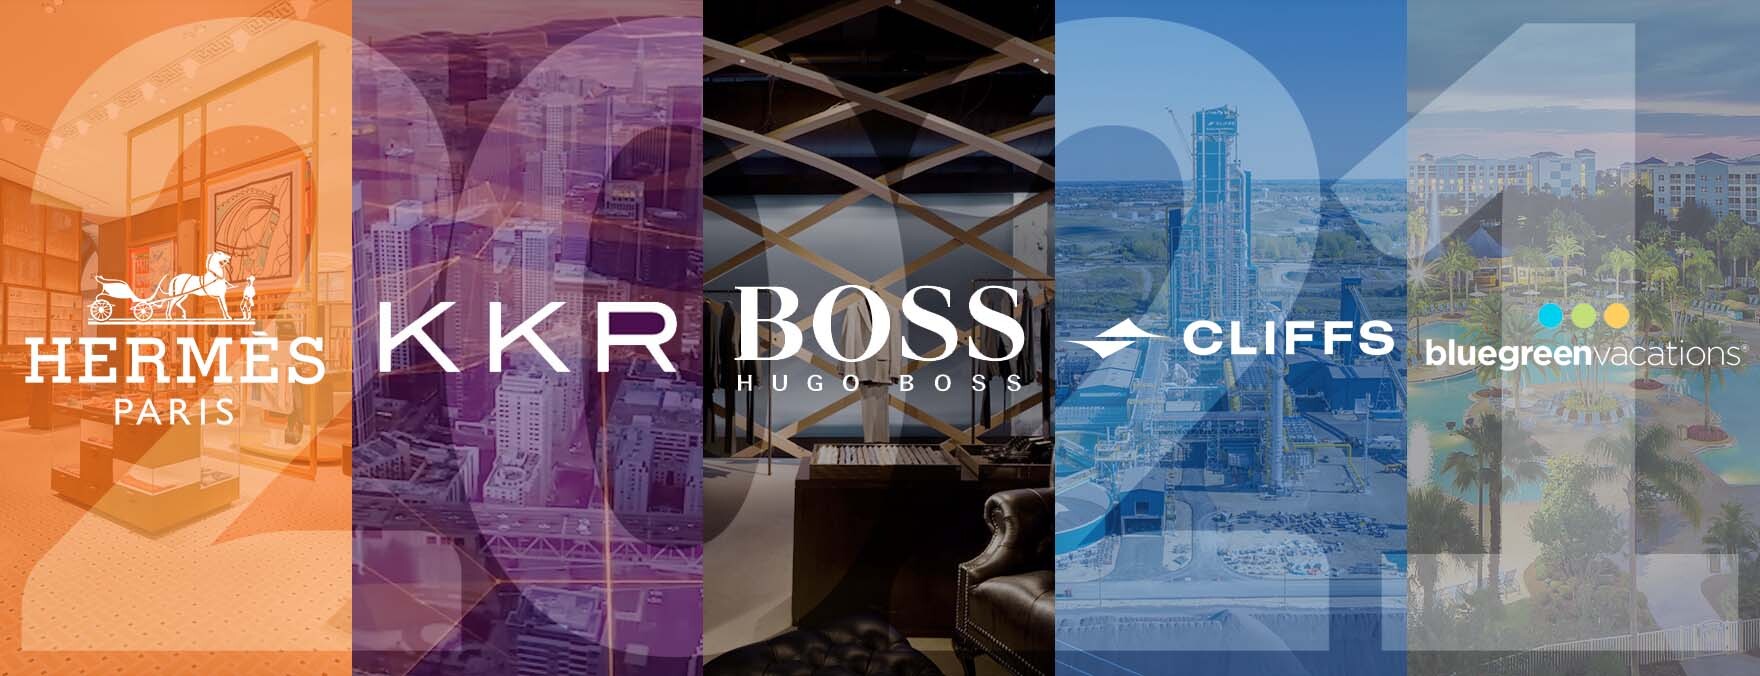 The collage of five companies in multi shades: (From Left to Right) Hermes Paris, KKR, Hugo Boss, Cliefs and Blue Green Vacations.